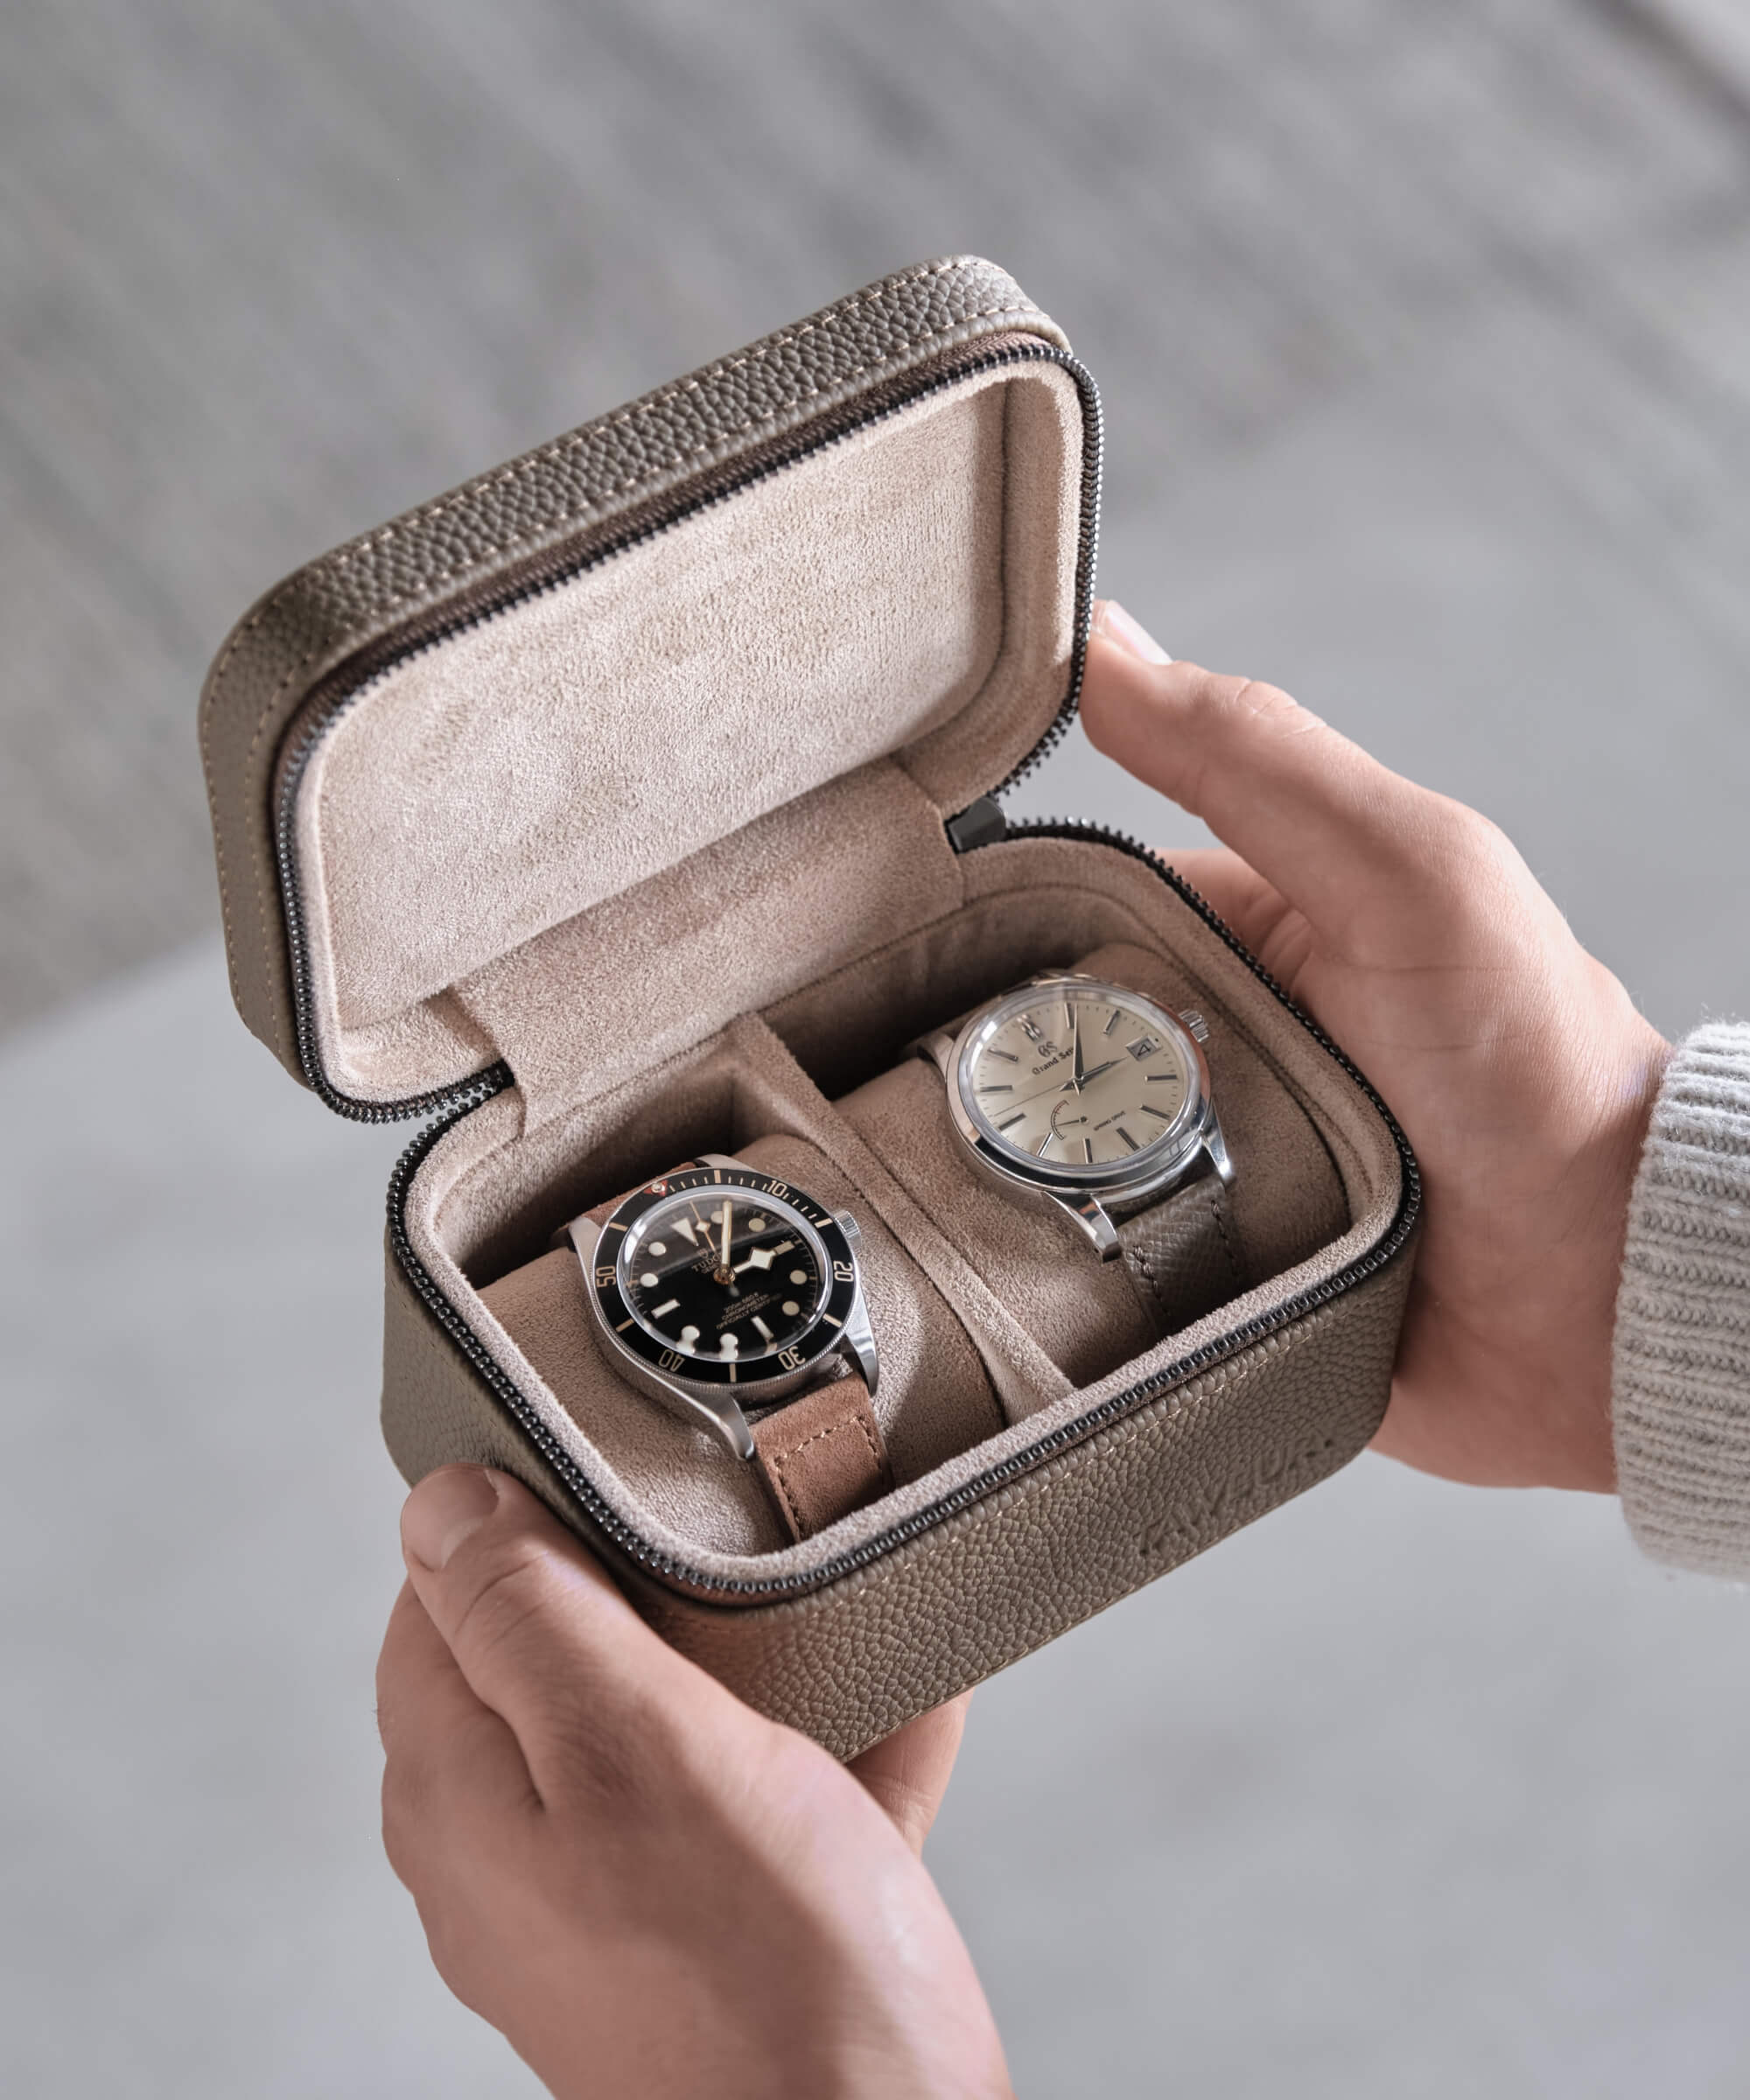 A watch lover's travel experience captured in a TAWBURY Fraser 2 Watch Travel Case - Taupe, featuring a person holding two watches in the leather case.